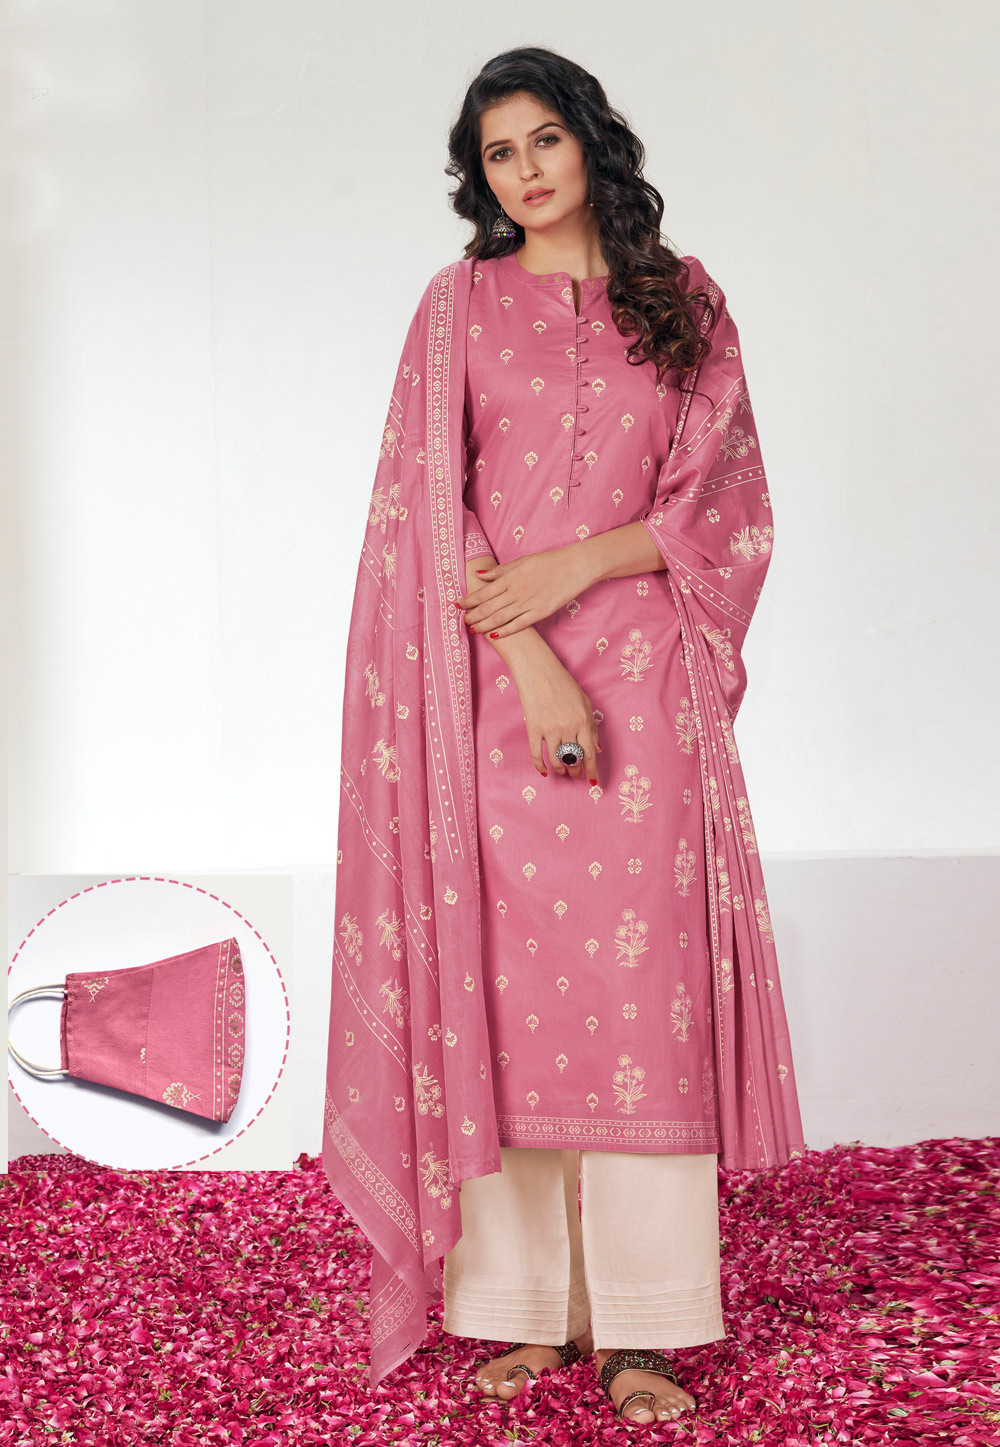 Pink Cotton Palazzo Suit With Face Mask 201877